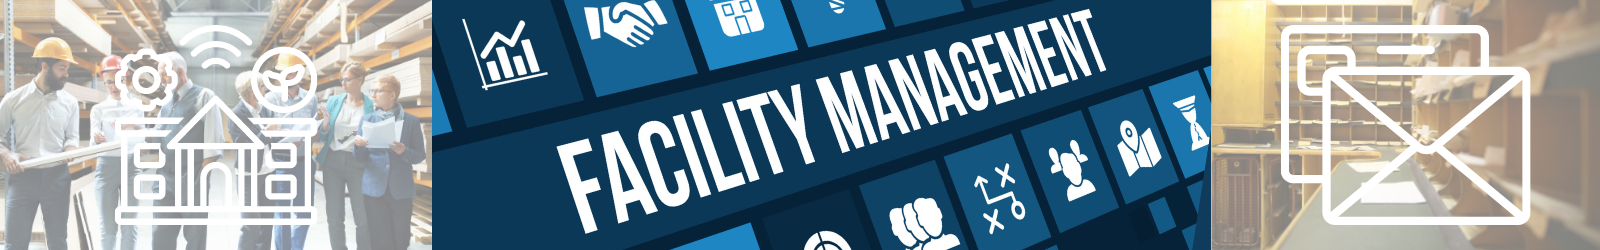 Facility Managment Main Page Banner 1600X250px